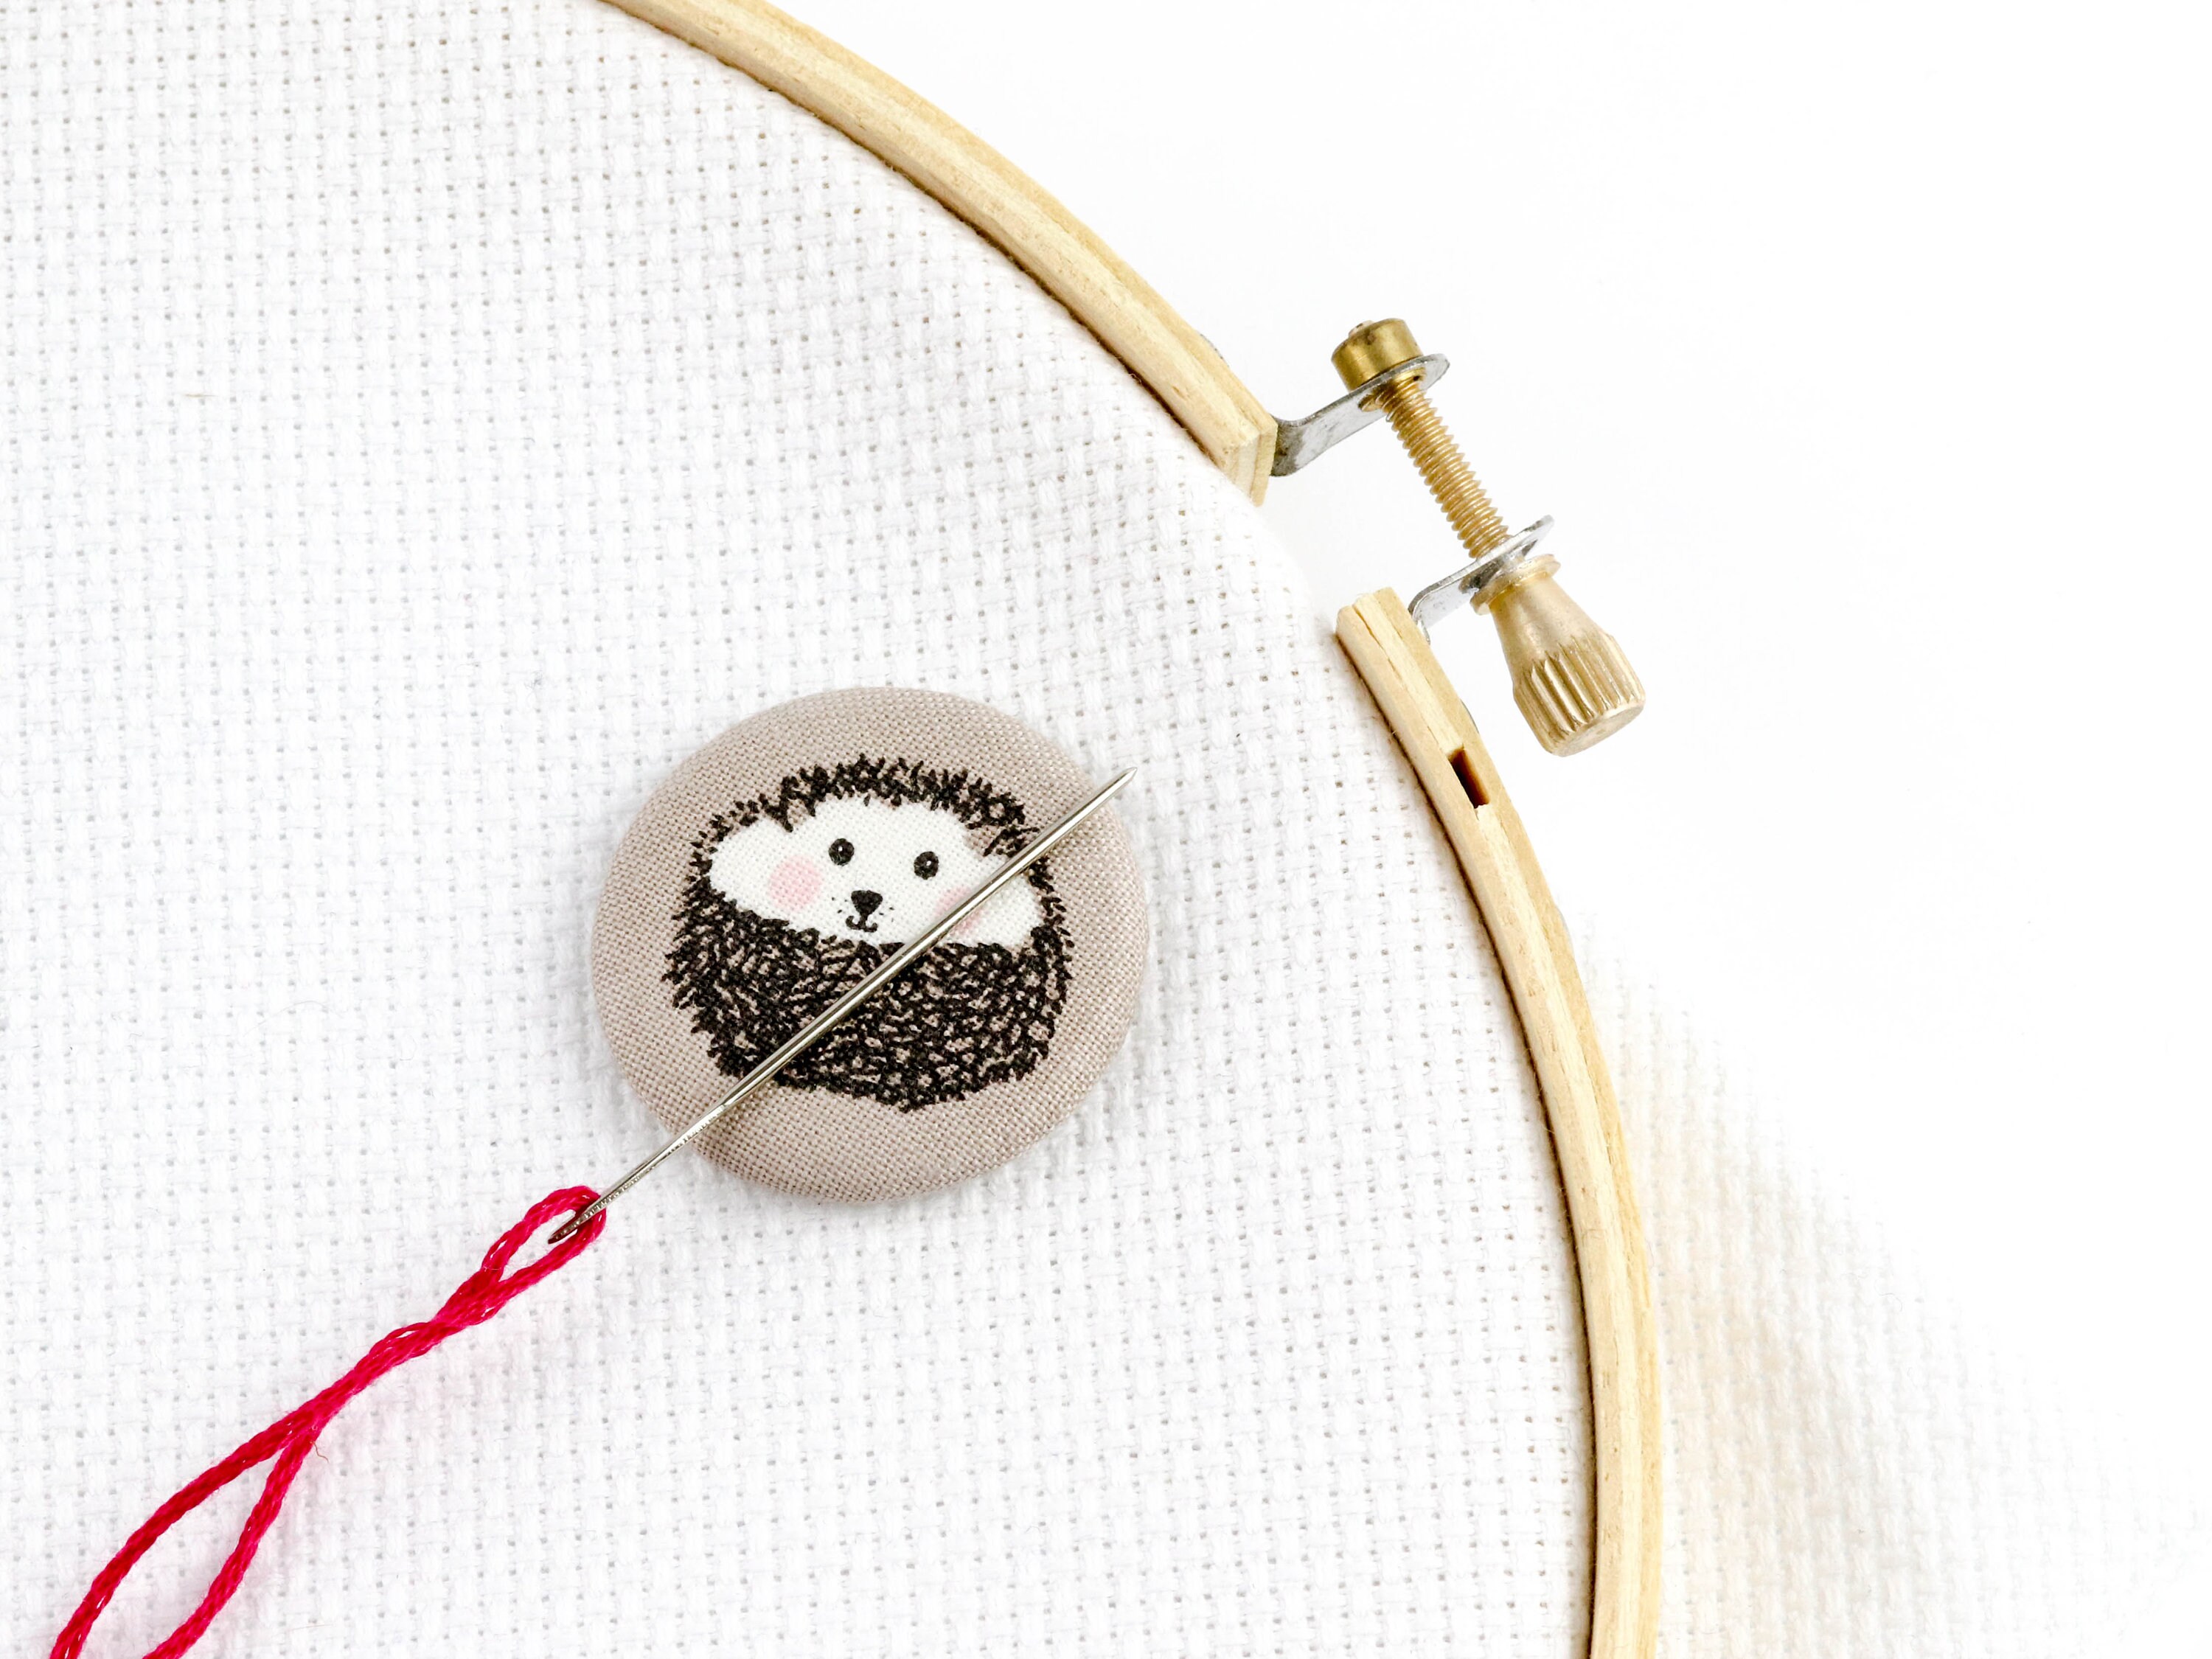 Magnetic Fabric Clips, as Featured in the World of Cross Stitching